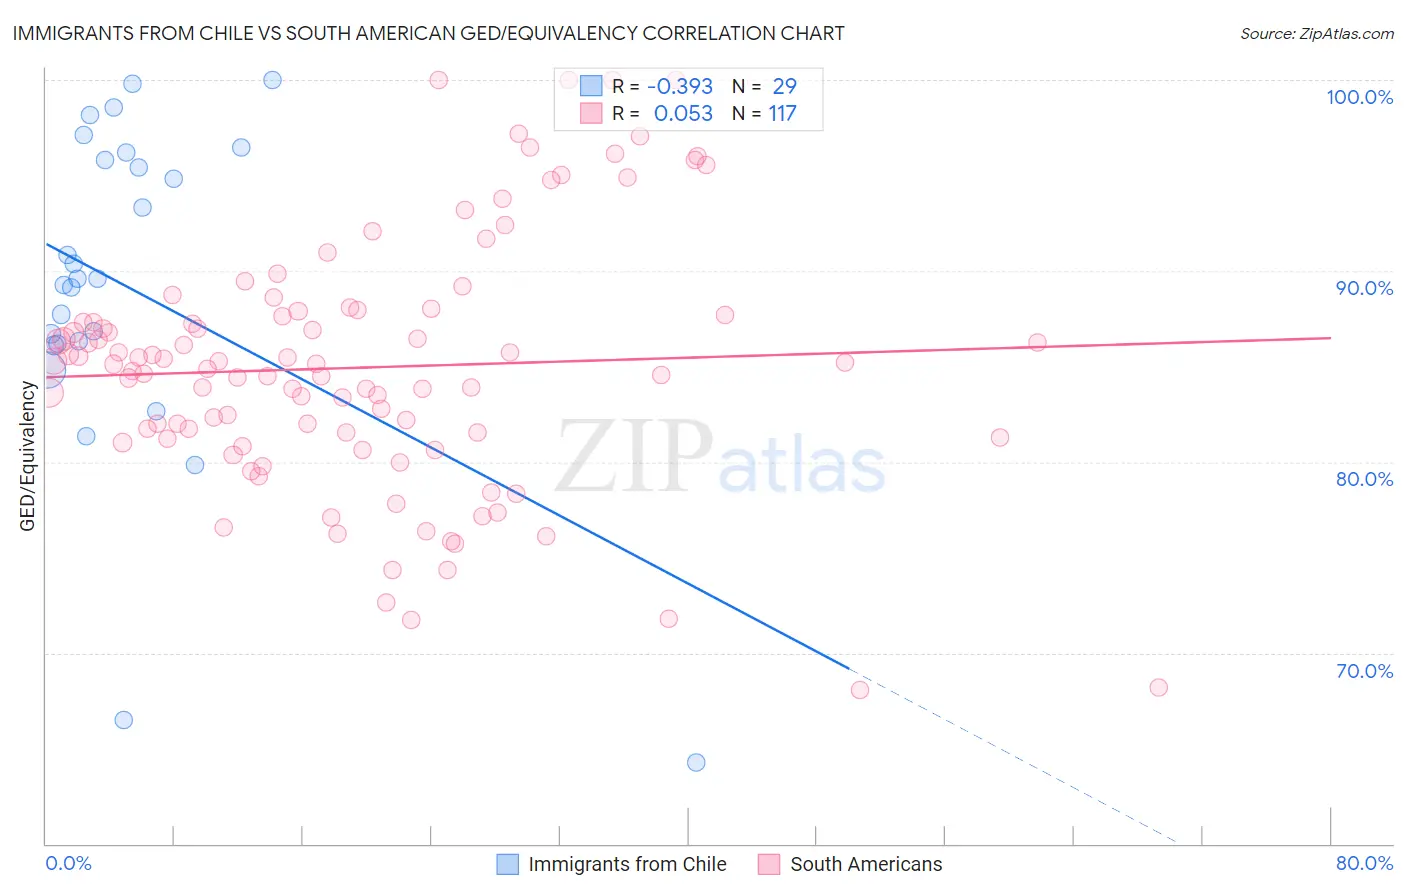 Immigrants from Chile vs South American GED/Equivalency